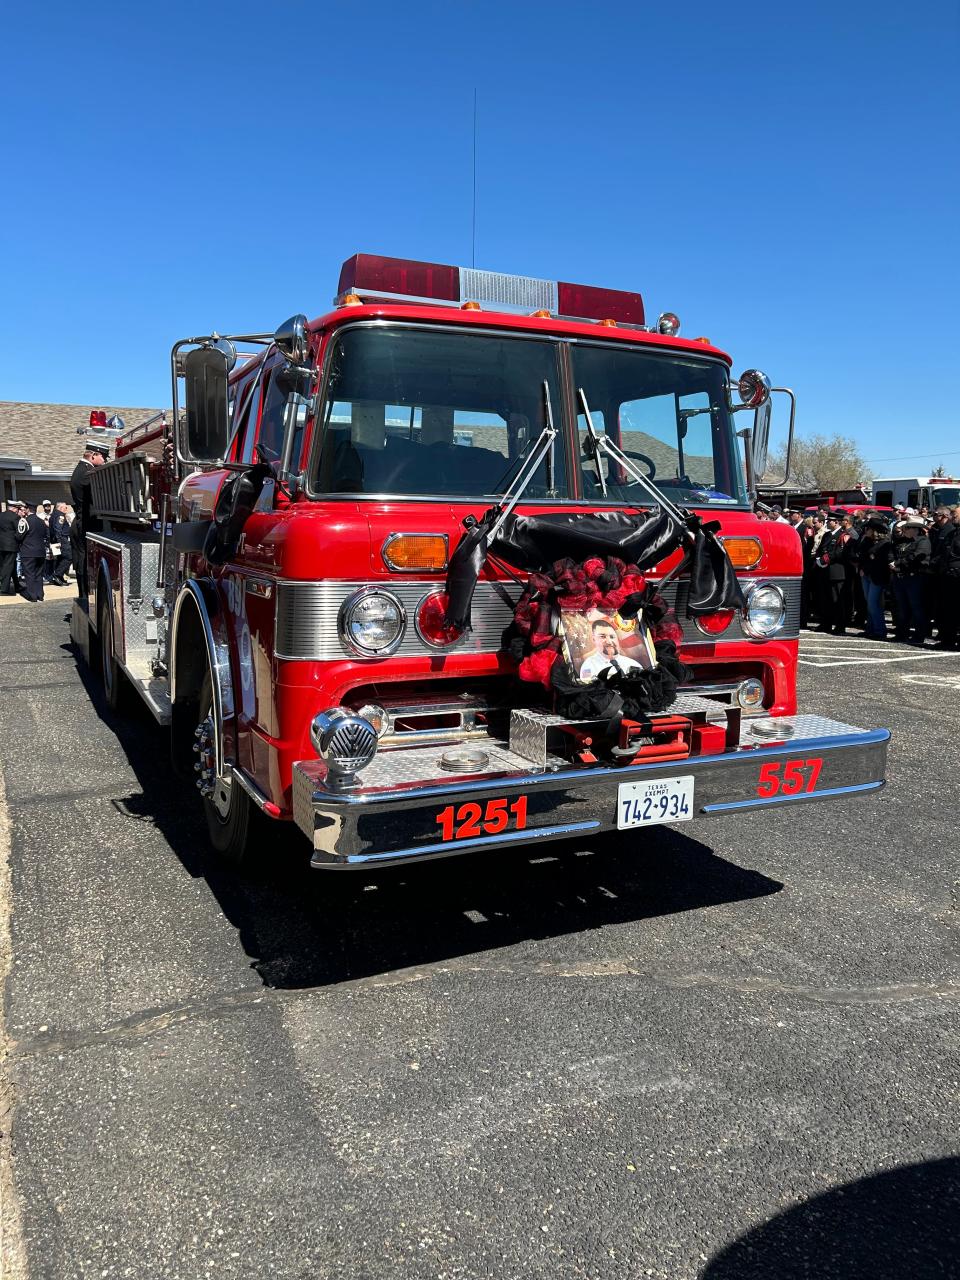 The front of Fire Engine 1251 was made into a memorial to fallen Fritch Fire Chief Zeb Smith, who died while fighting a house fire. He had been fighting the wildfires that have been raging across the Texas Panhandle for days before.